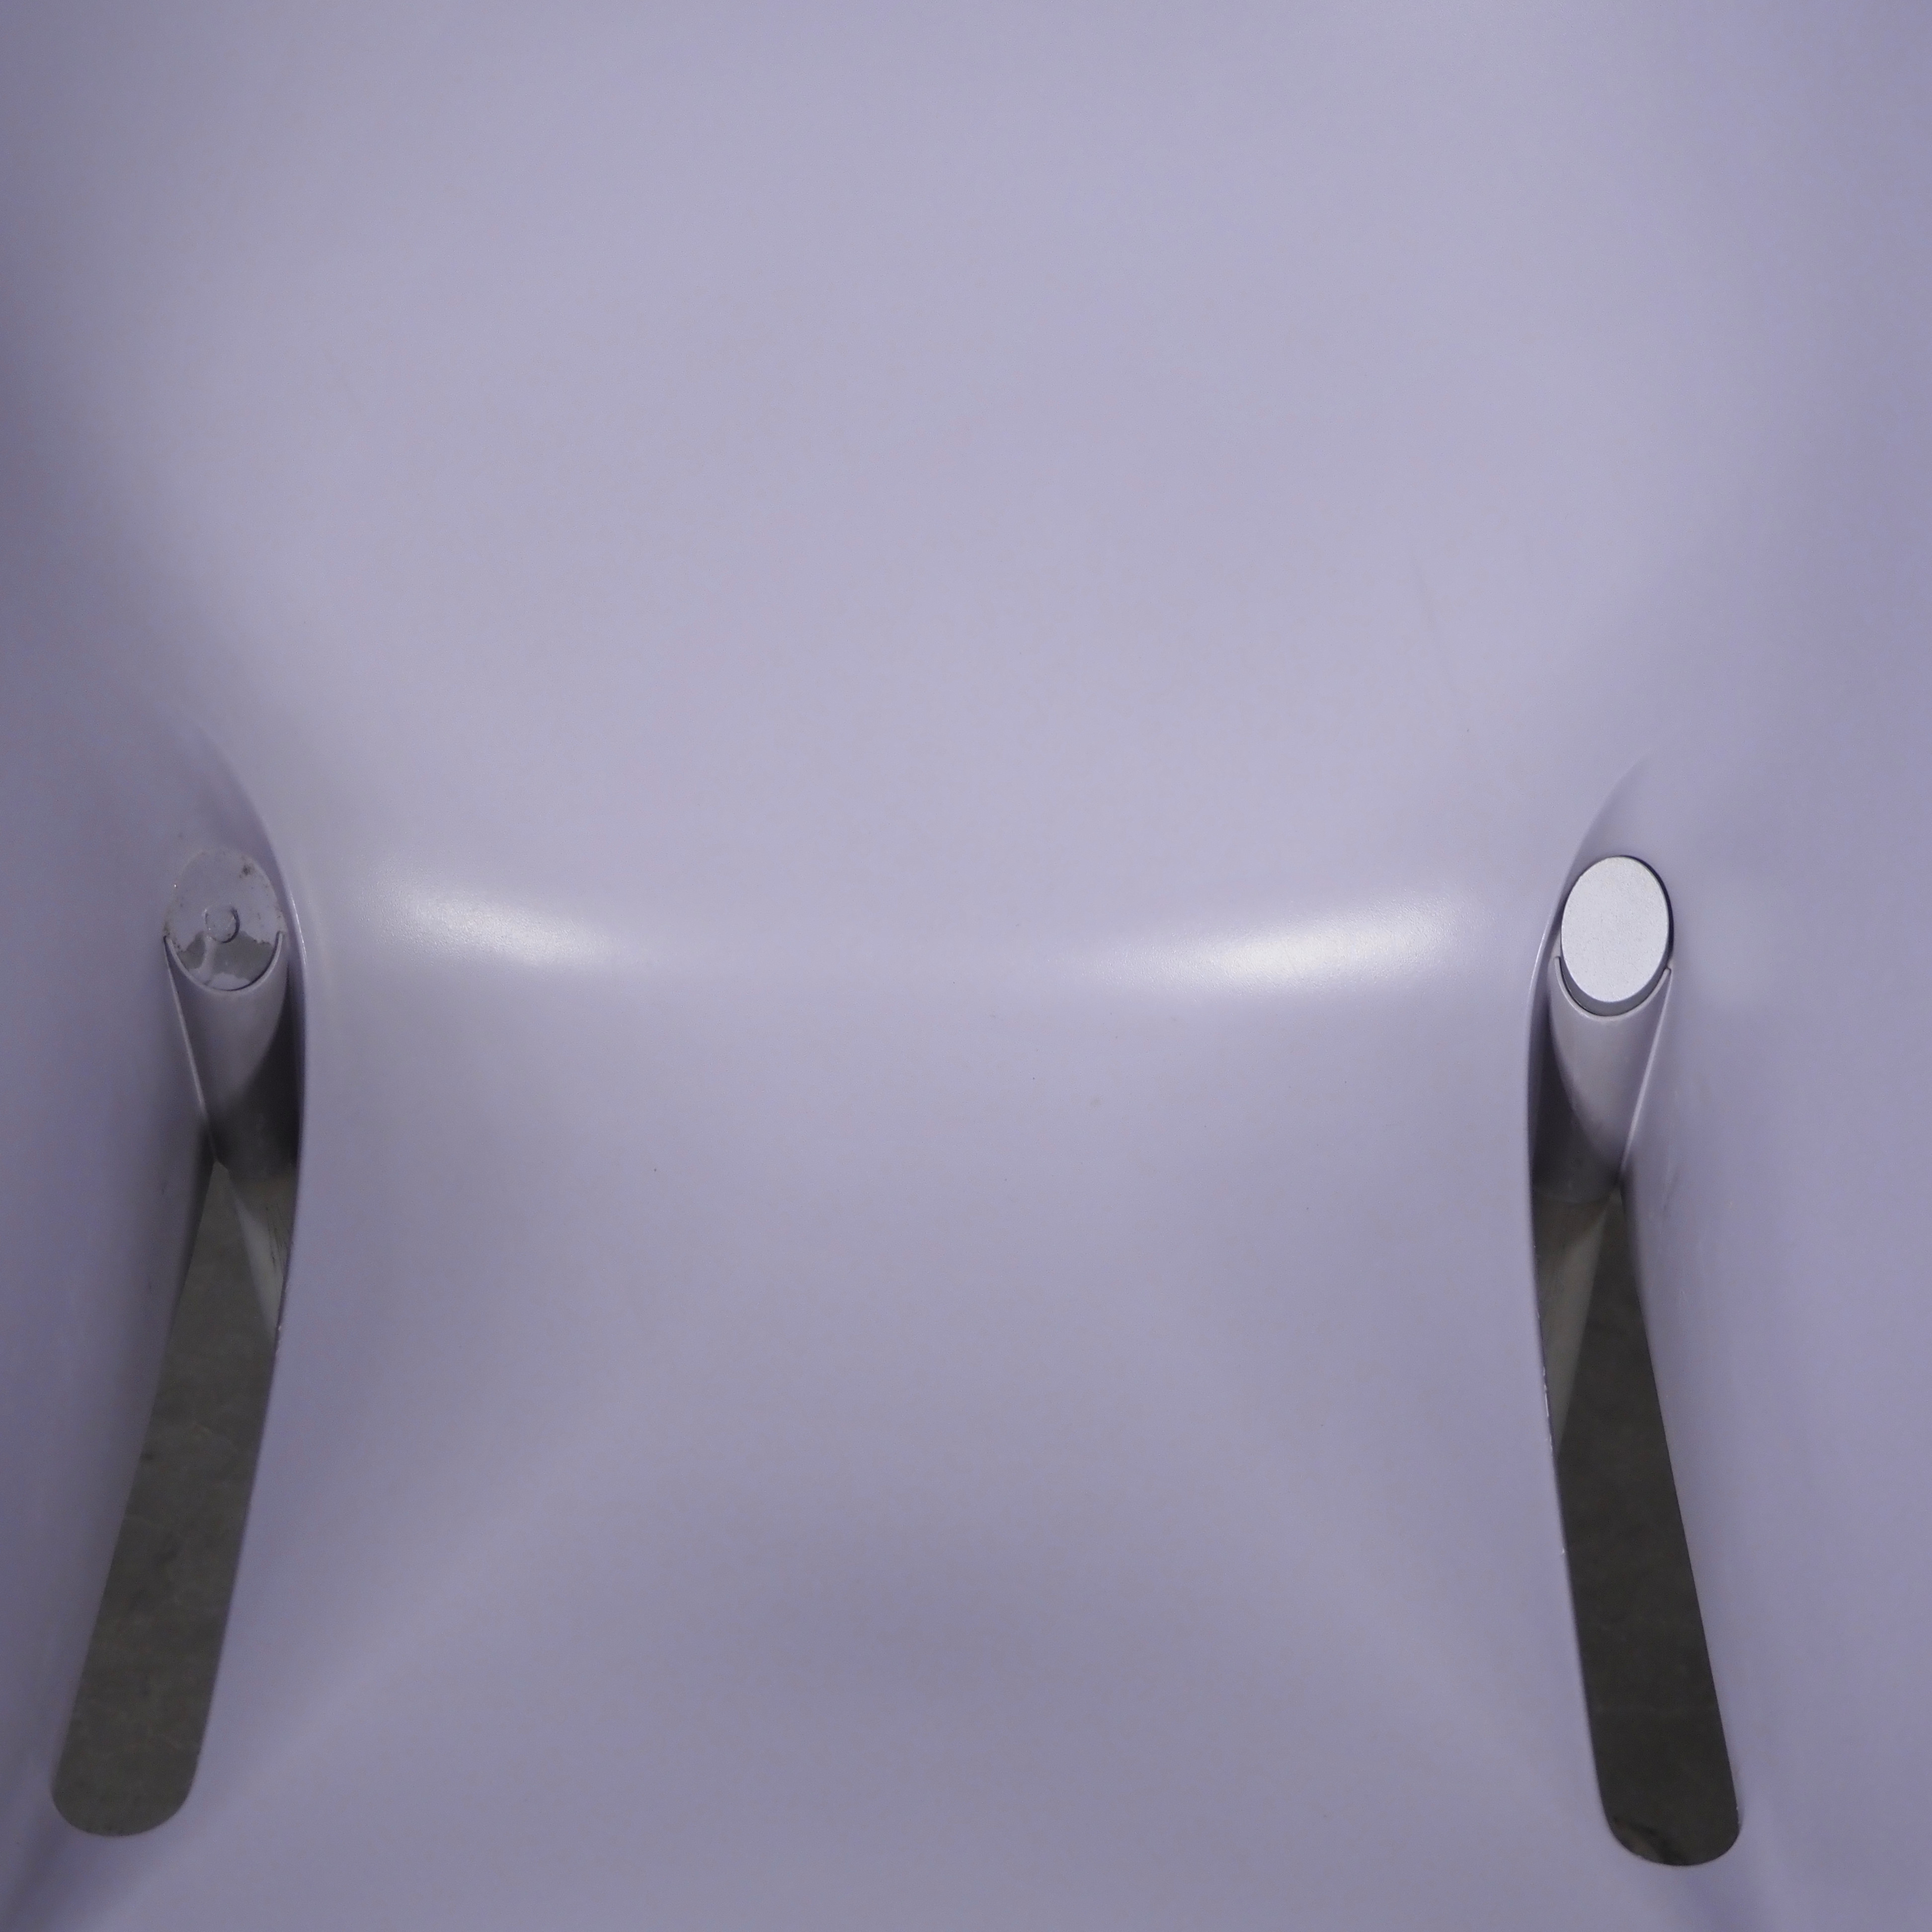 Armchair 'Dr. NO' by Philippe Starck for Kartell (ca. 1997) - Lilac